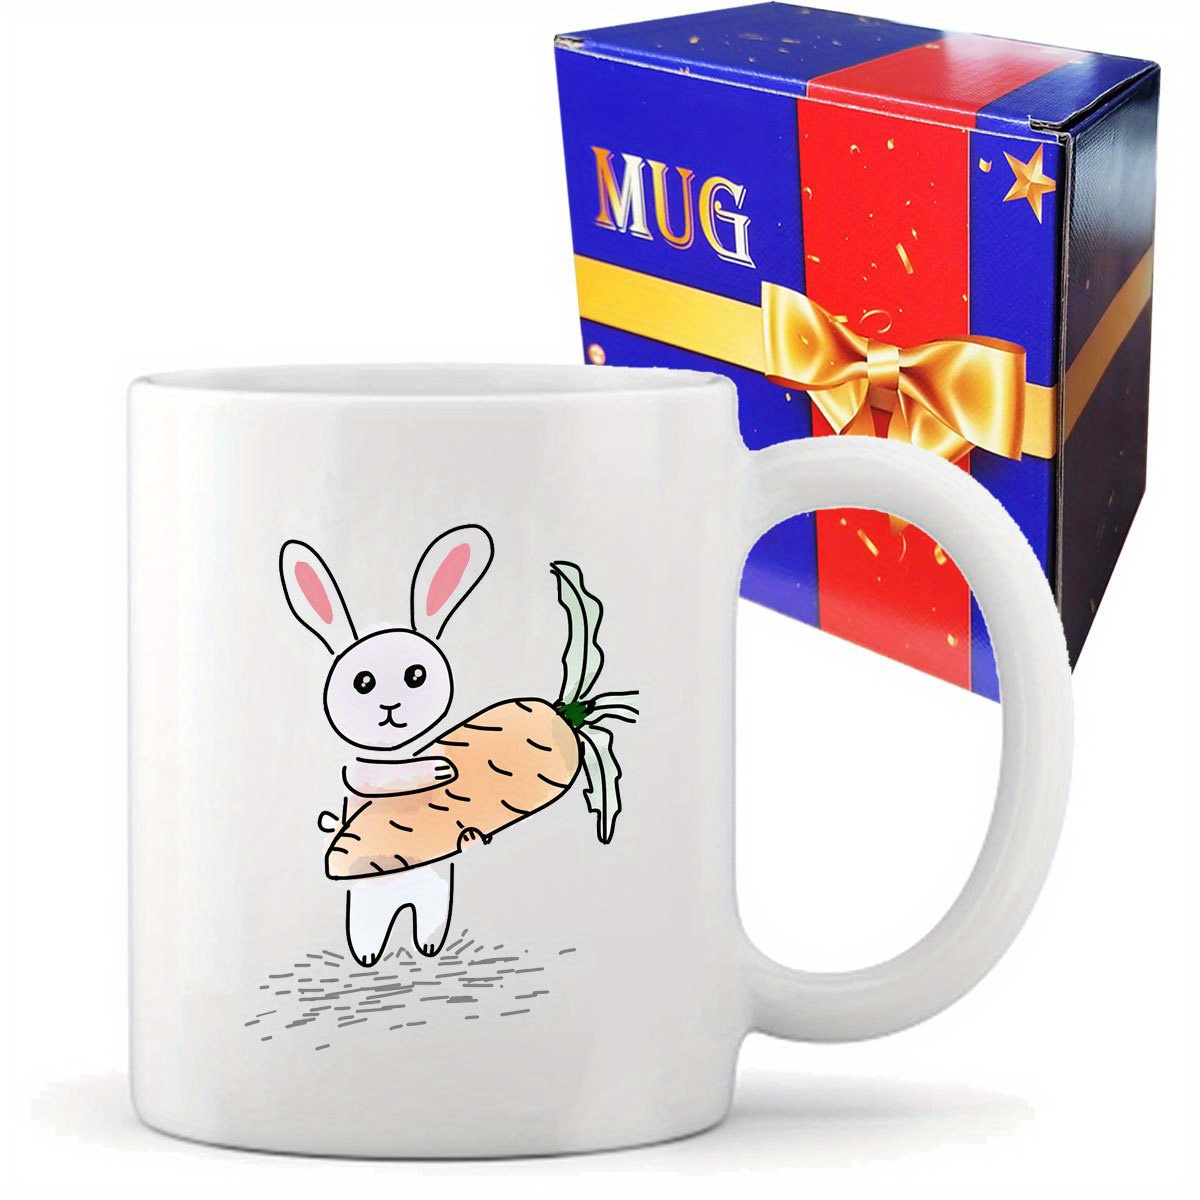 easter mug easter egg bunny coffee mug colorful holiday ceramic tea mug cup for easter spring party home school office table centerpieces gift 11oz